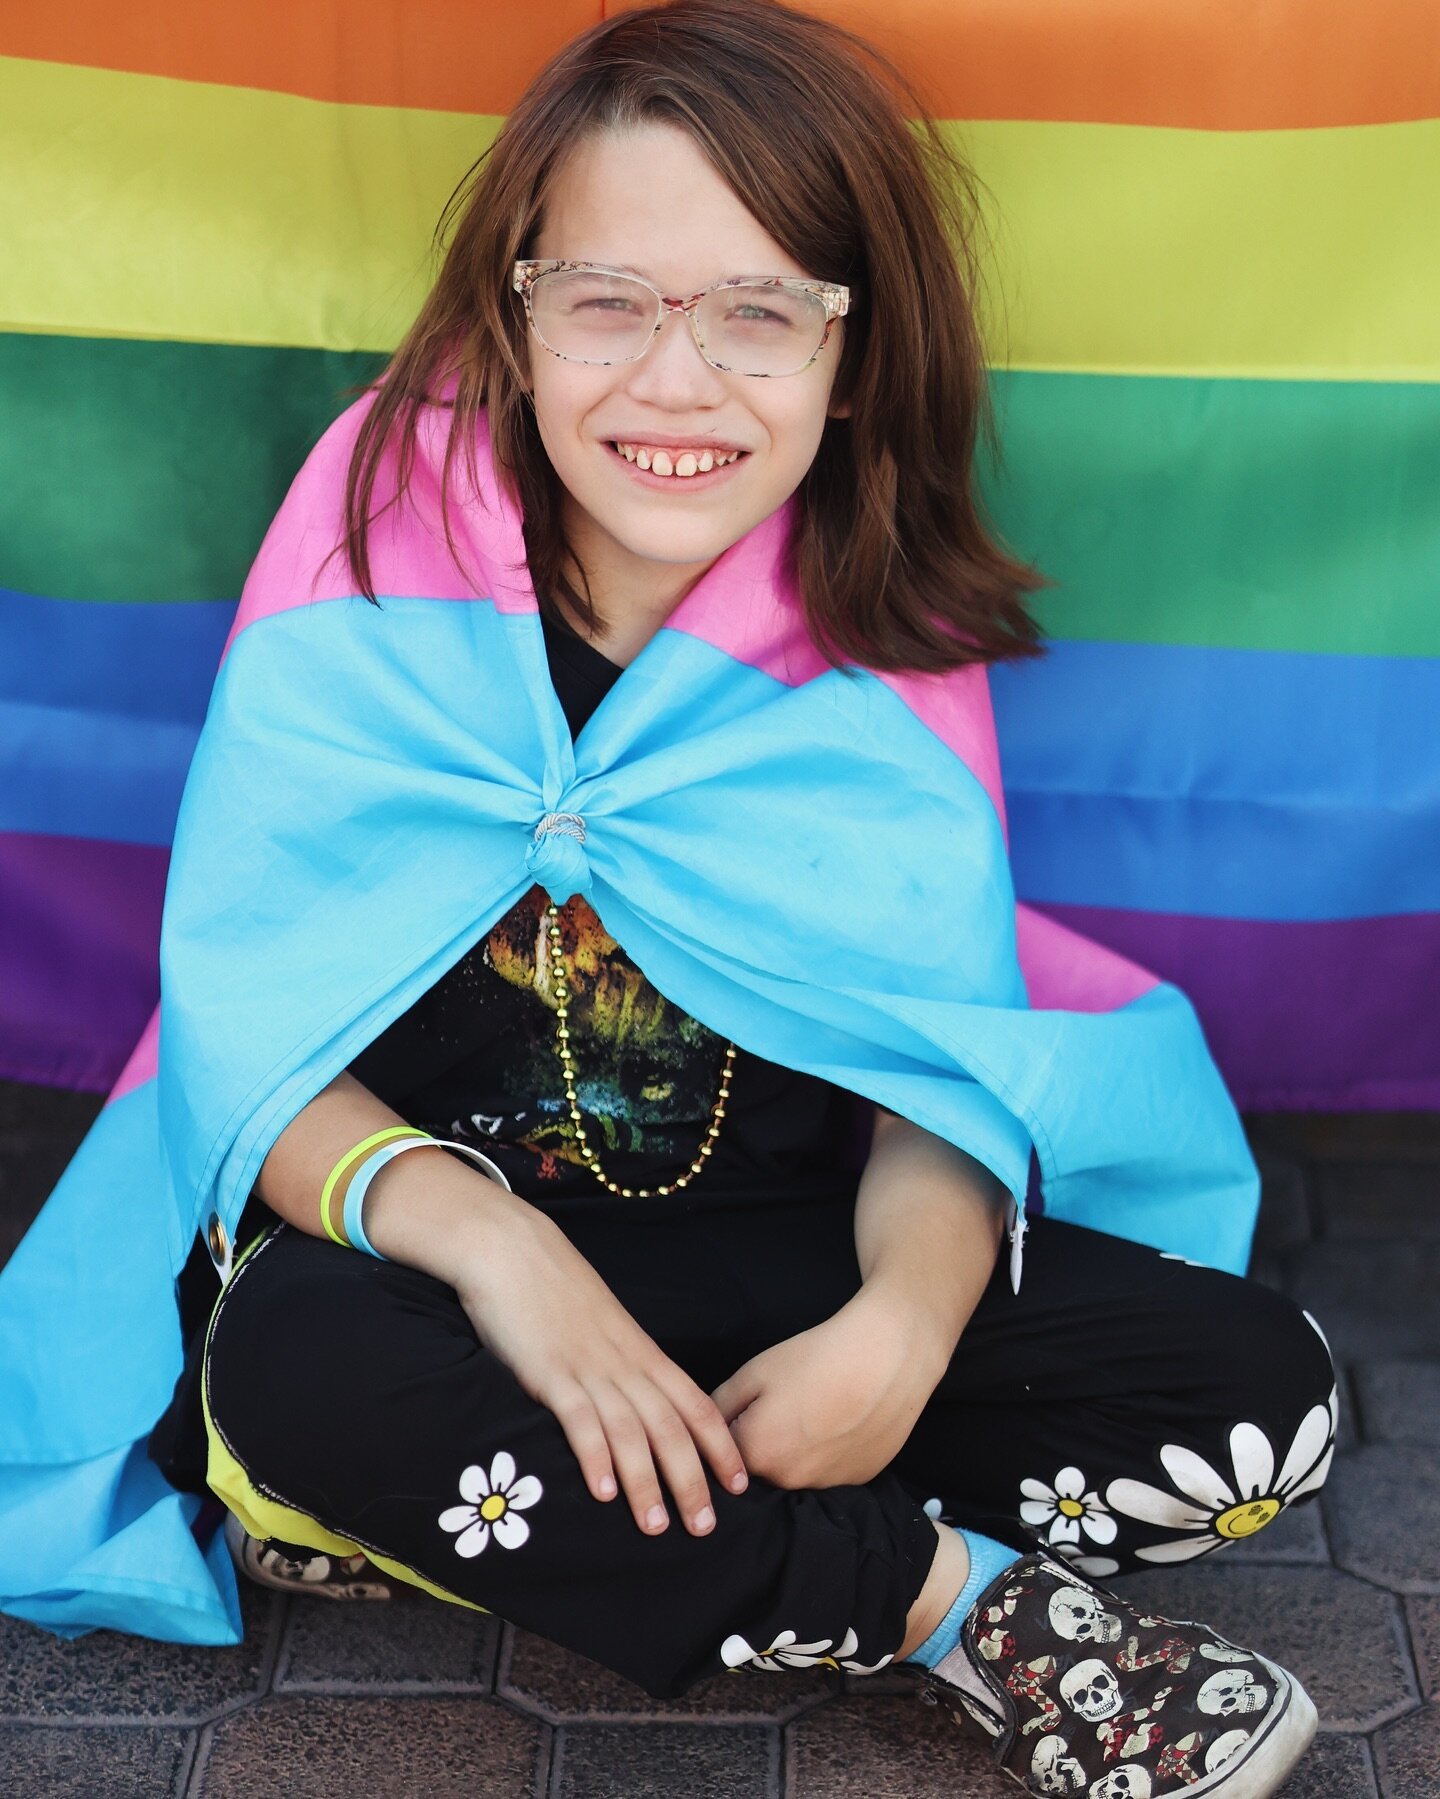 I came out three years ago when I was eight. I felt like I was in the wrong body, and it made me anxious. I told my parents that I felt like a girl, not a boy. They were perfectly fine with it because my mom is bisexual and my other parent is trans.
